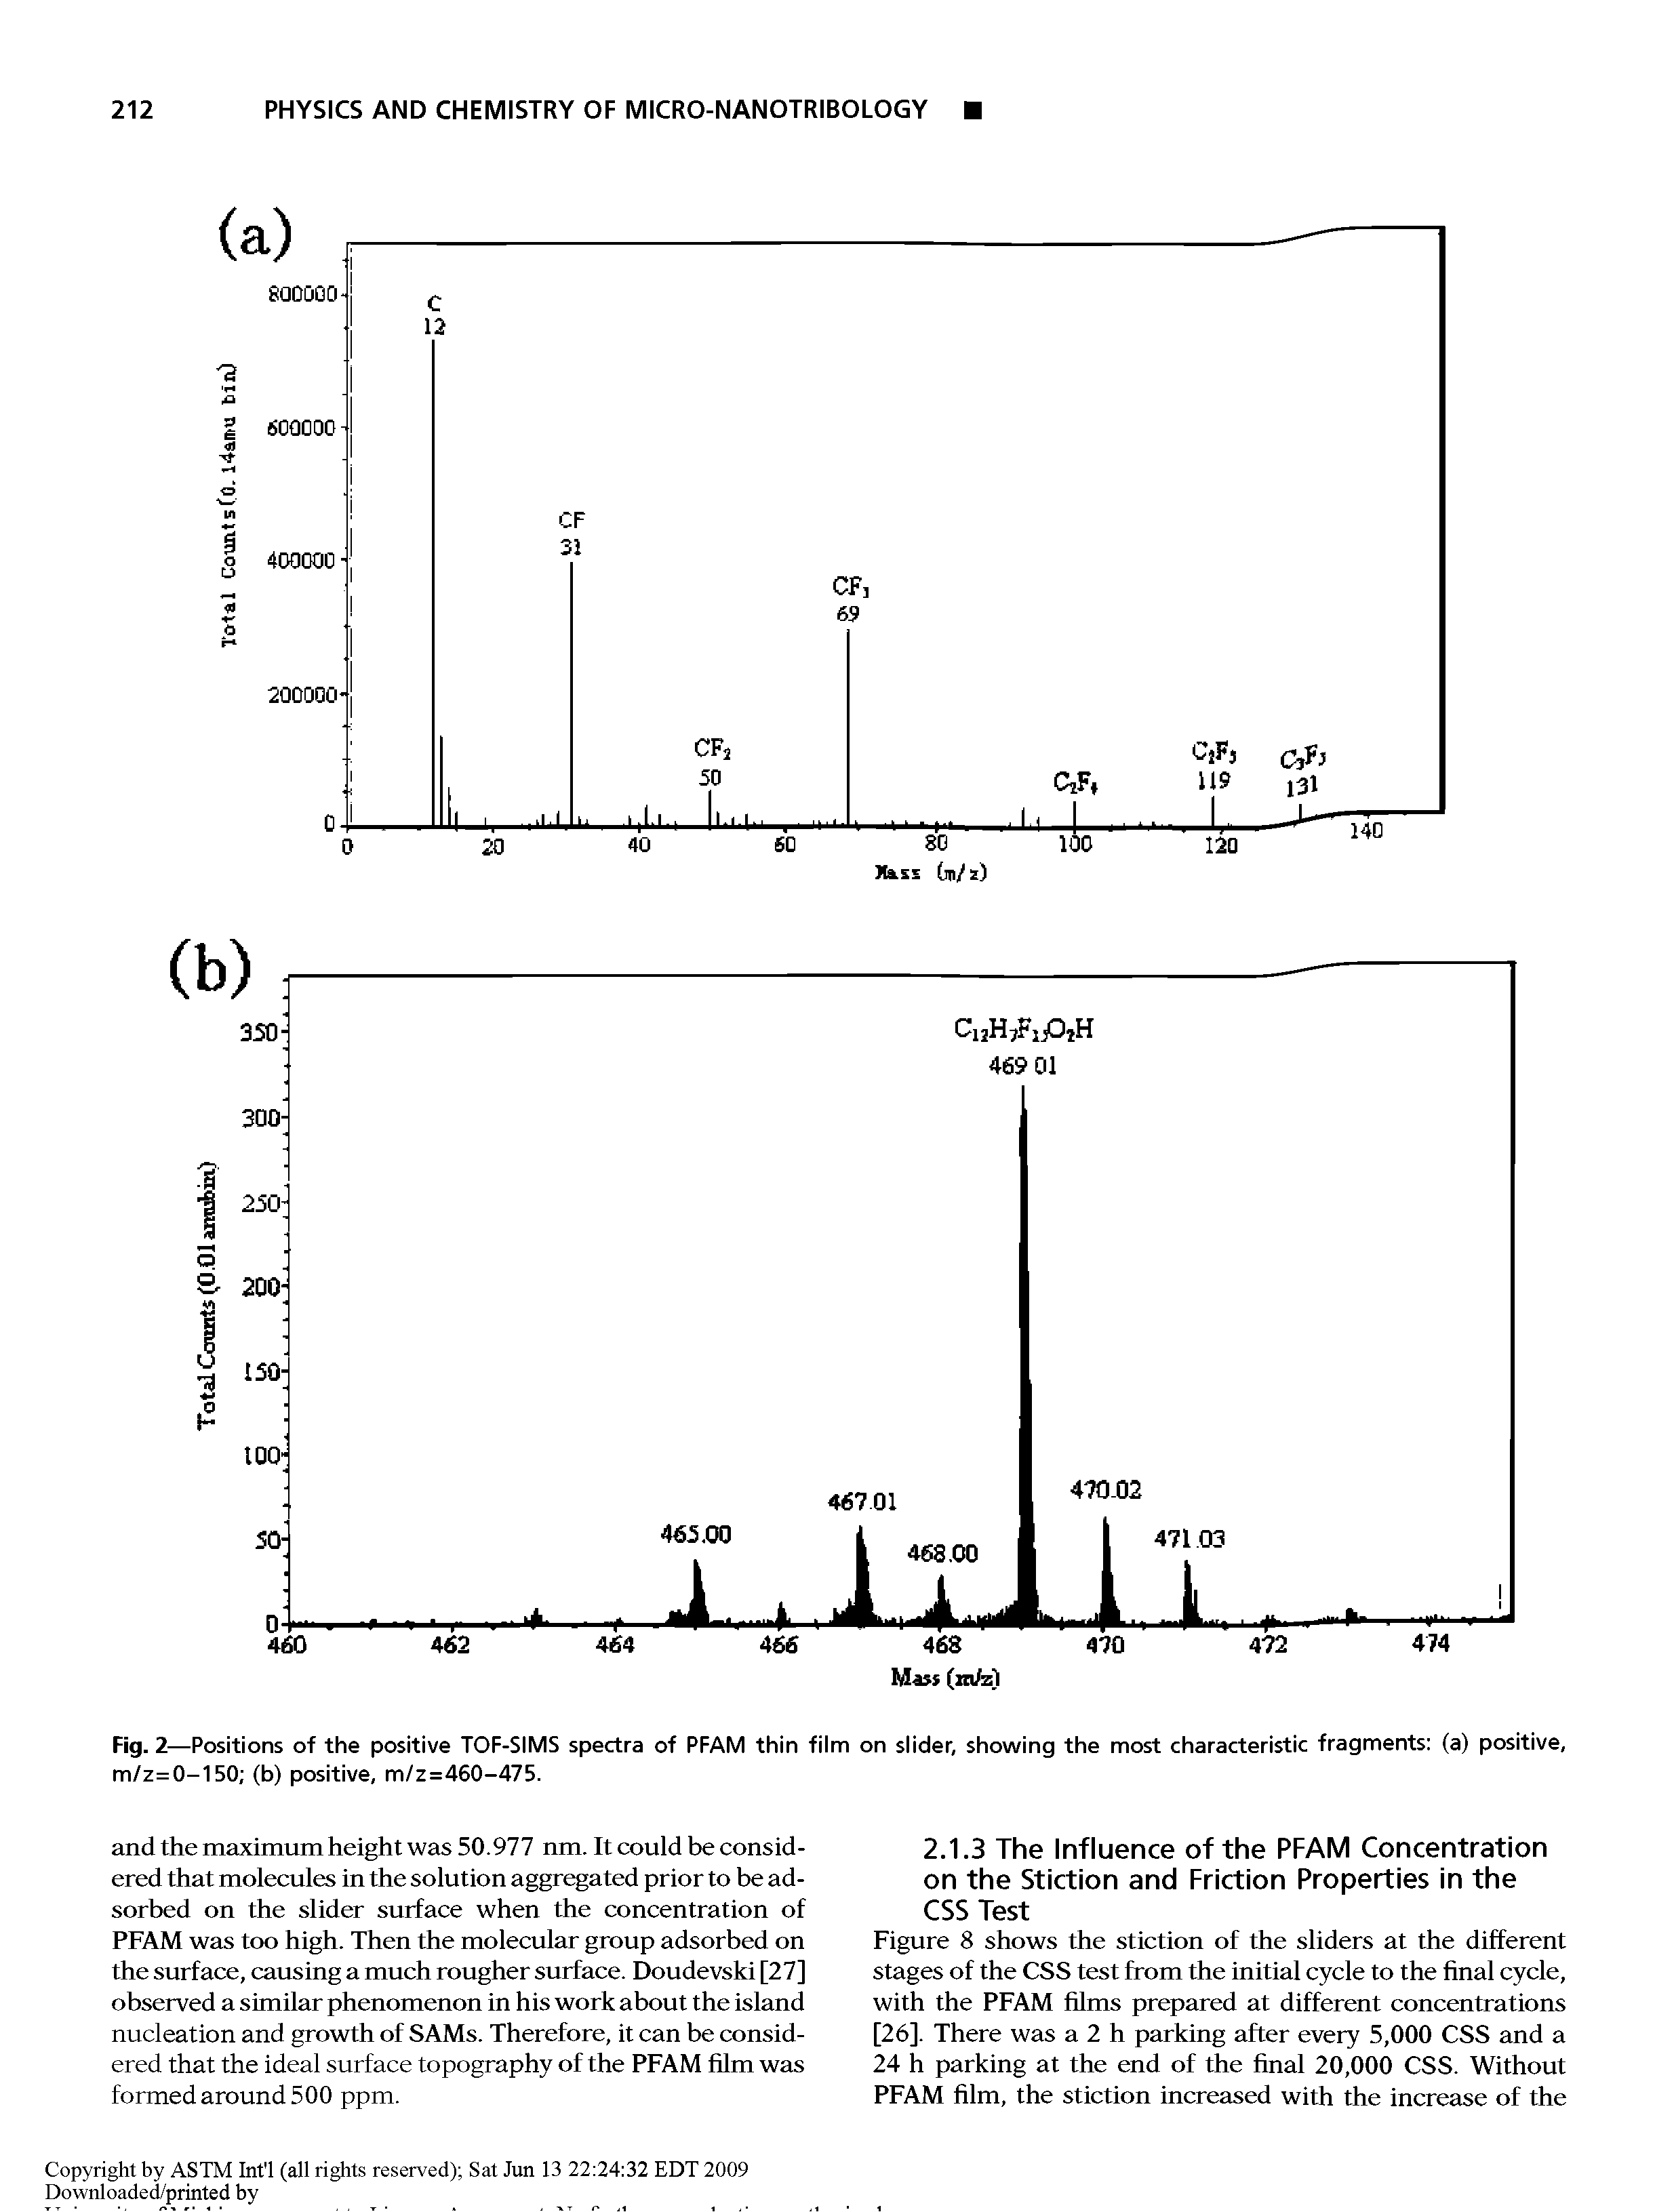 Fig. 2— Positions of the positive TOF-SIMS spectra of PFAM thin film on slider, showing the most characteristic fragments (a) positive, m/z=0-150 (b) positive, m/z=460-475.